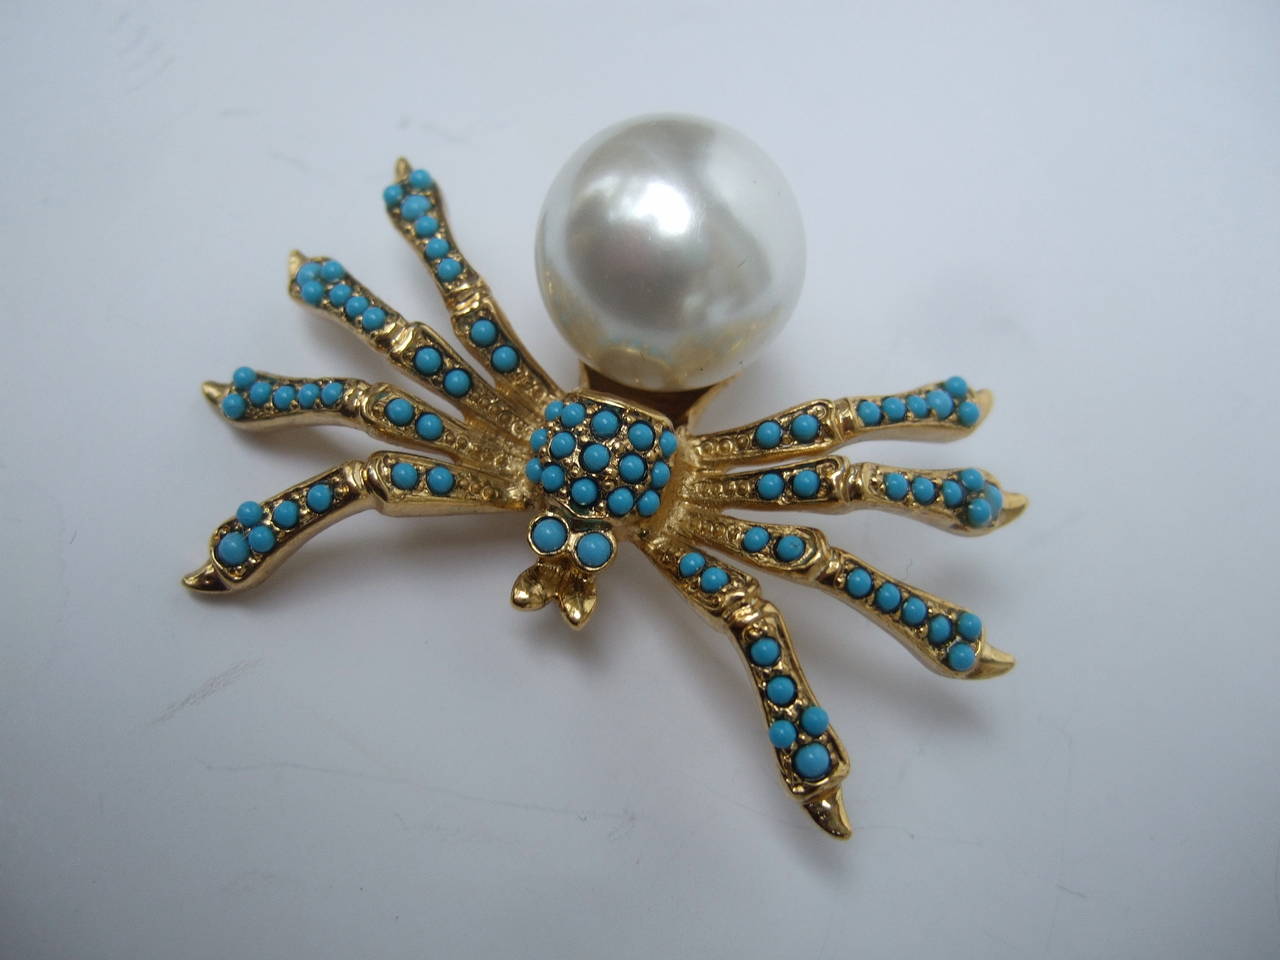 Kenneth Lane Jeweled spider brooch. The unique brooch is embellished with a lustrous enamel resin pearl accented with tiny turquoise color resin beads
The figural spider brooch is designed with gilt metal & stamped: Kenneth Lane

The avant-garde